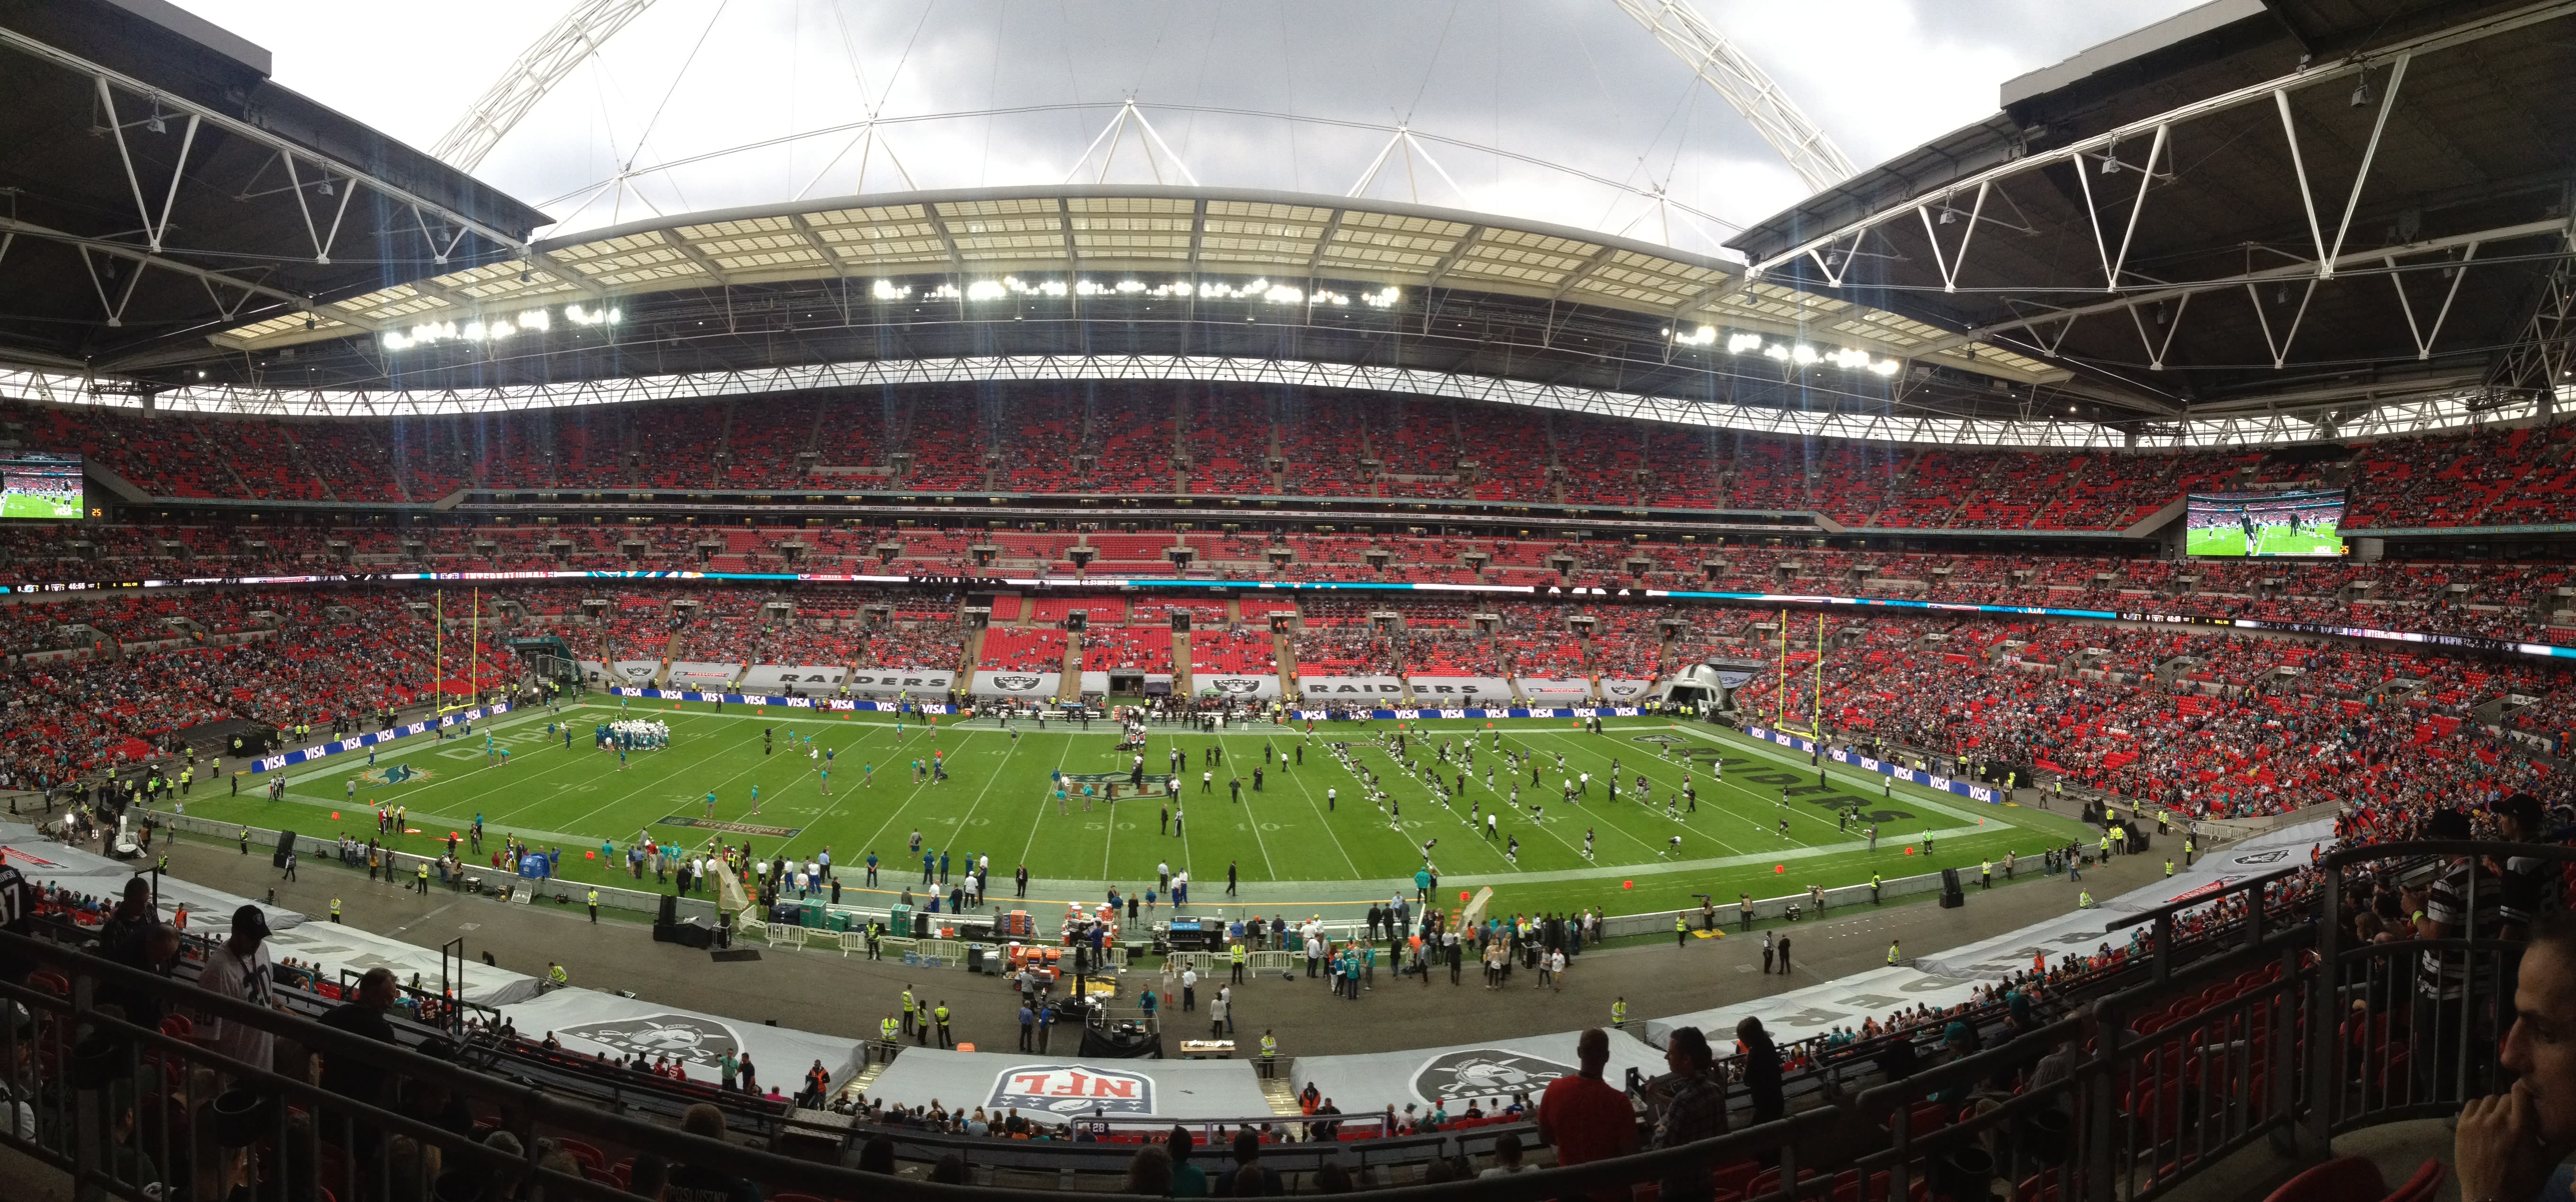 Why does the NFL play games in London? 